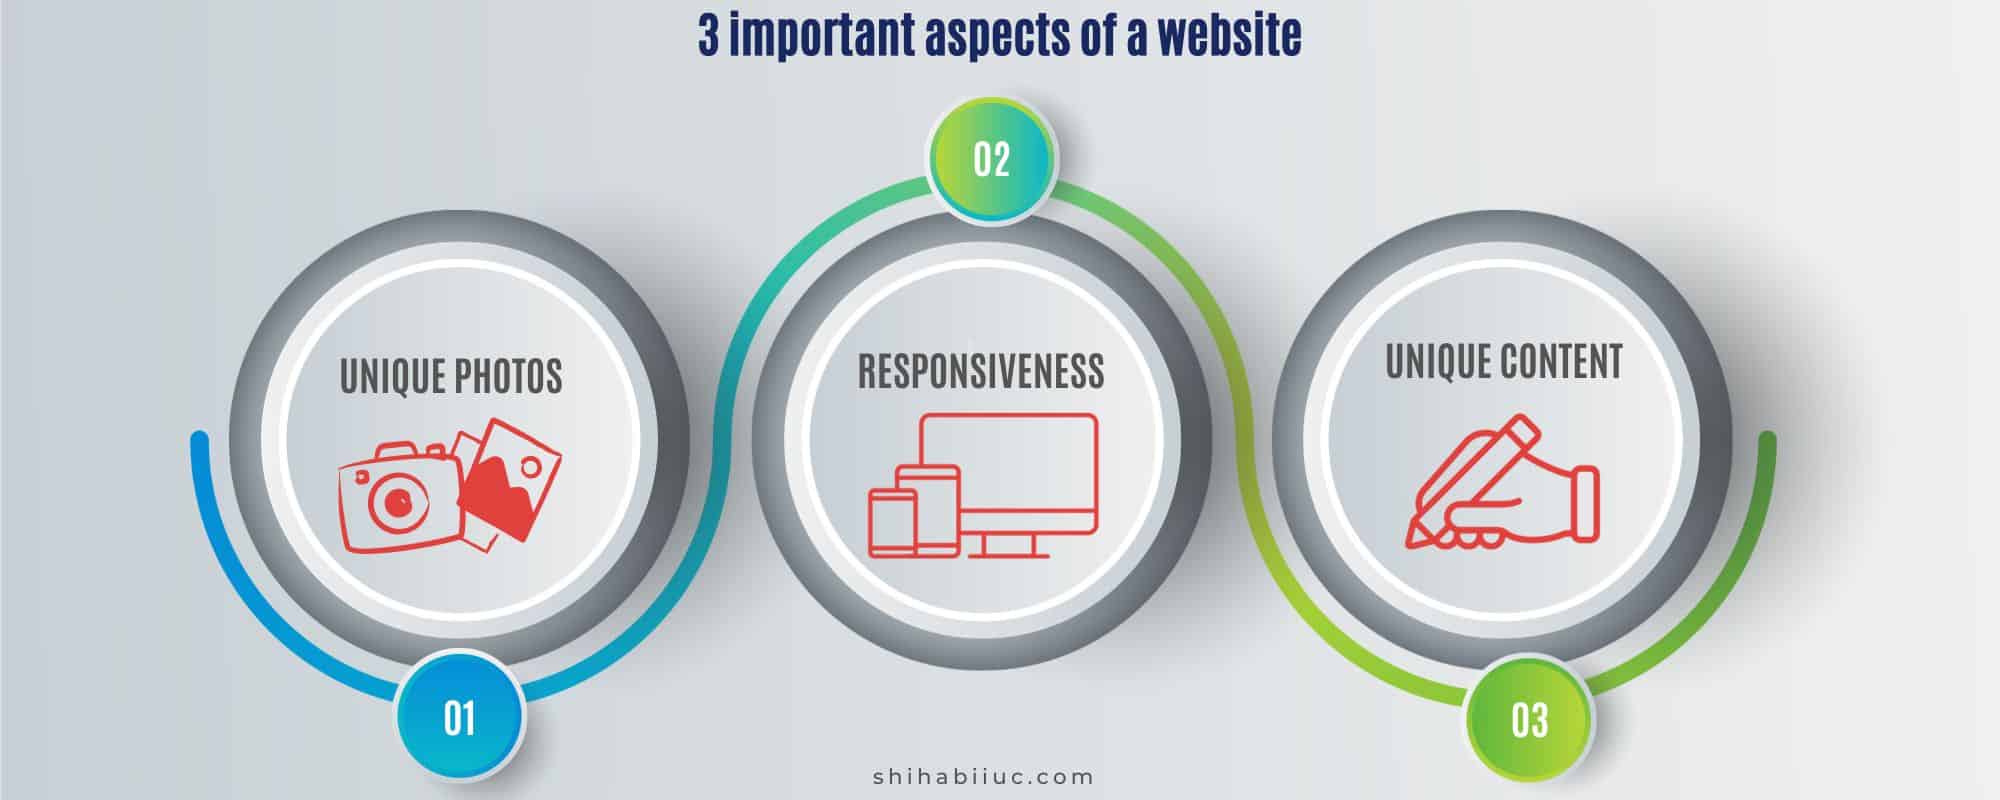 3 Important aspects of a website